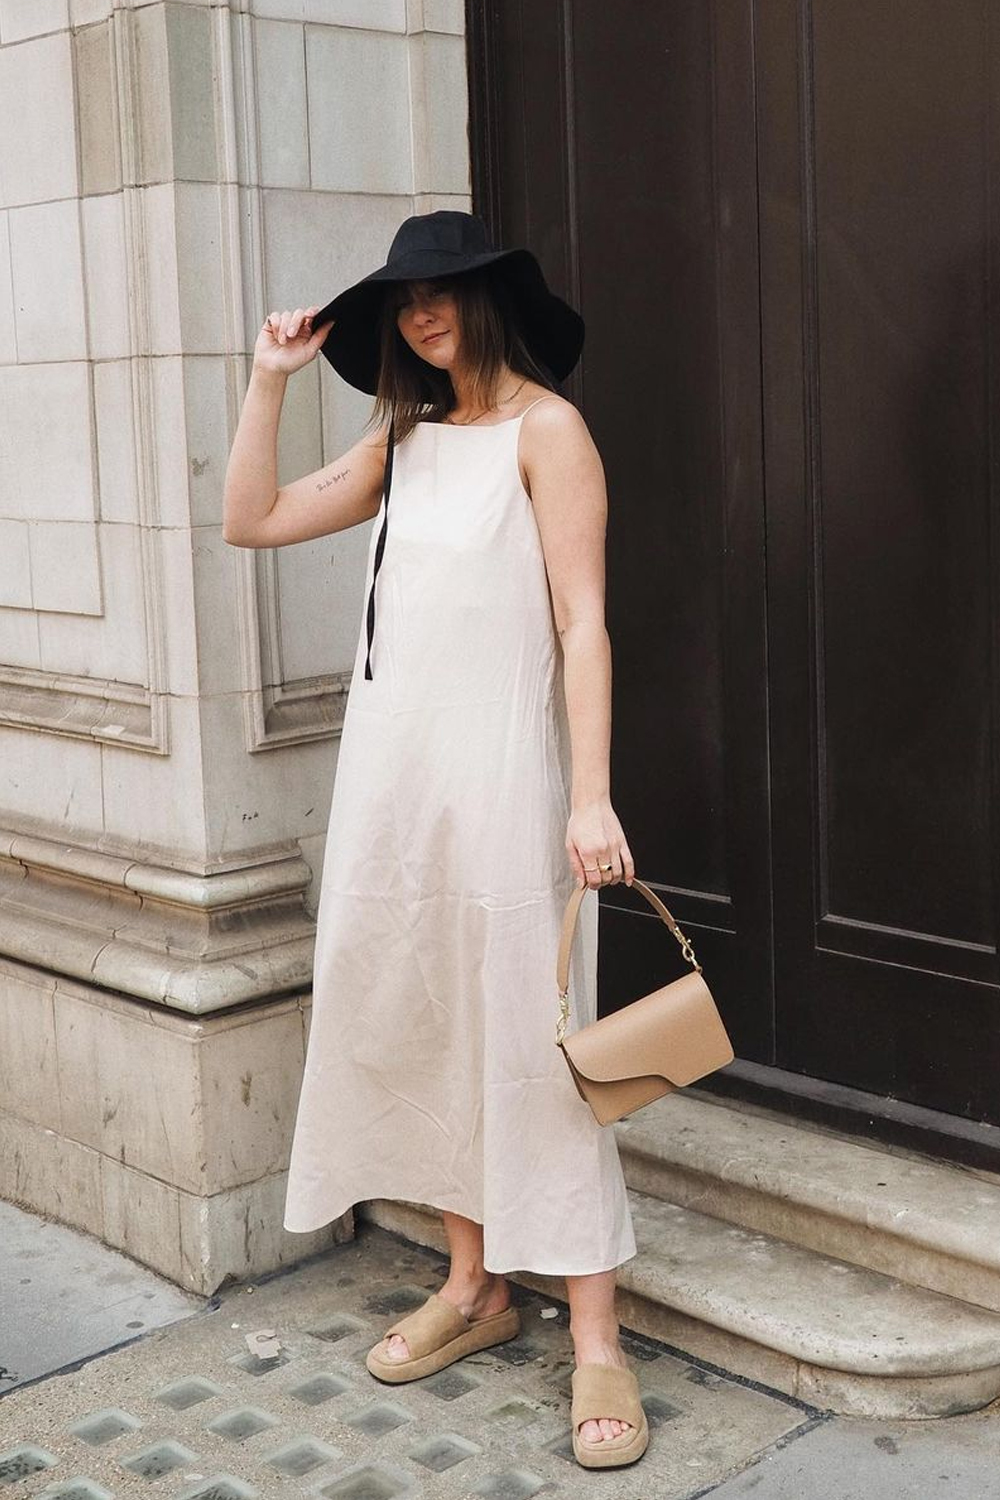 These Oversize Dresses Are the Coolest Thing You’ll Wear This Summer